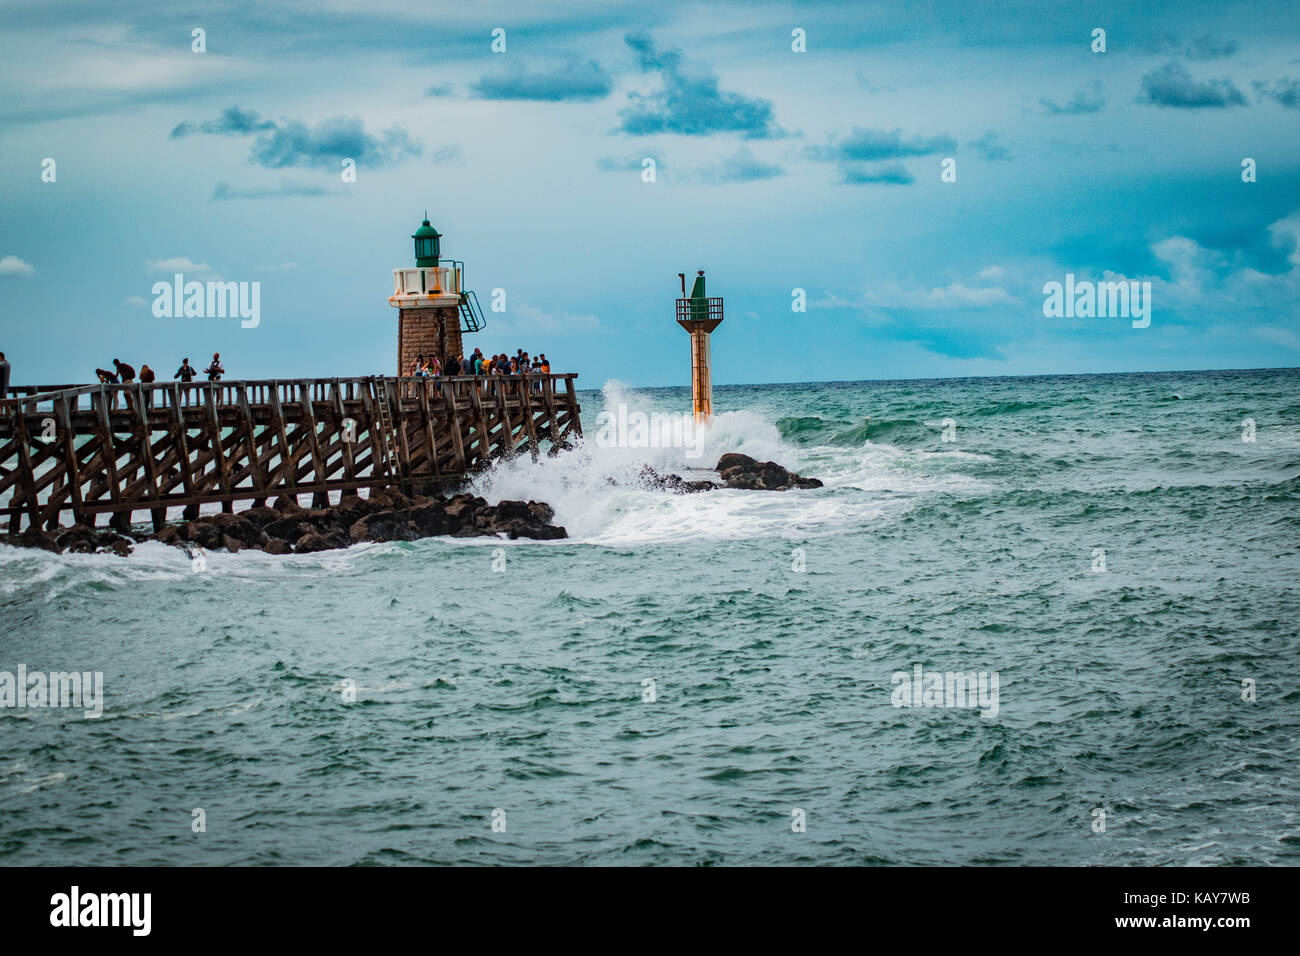 This is amazing image of a sea scene with a pier, lighthouse, crashing waves, rocks and an amazing blue sky with clouds that complete the image. Stock Photo